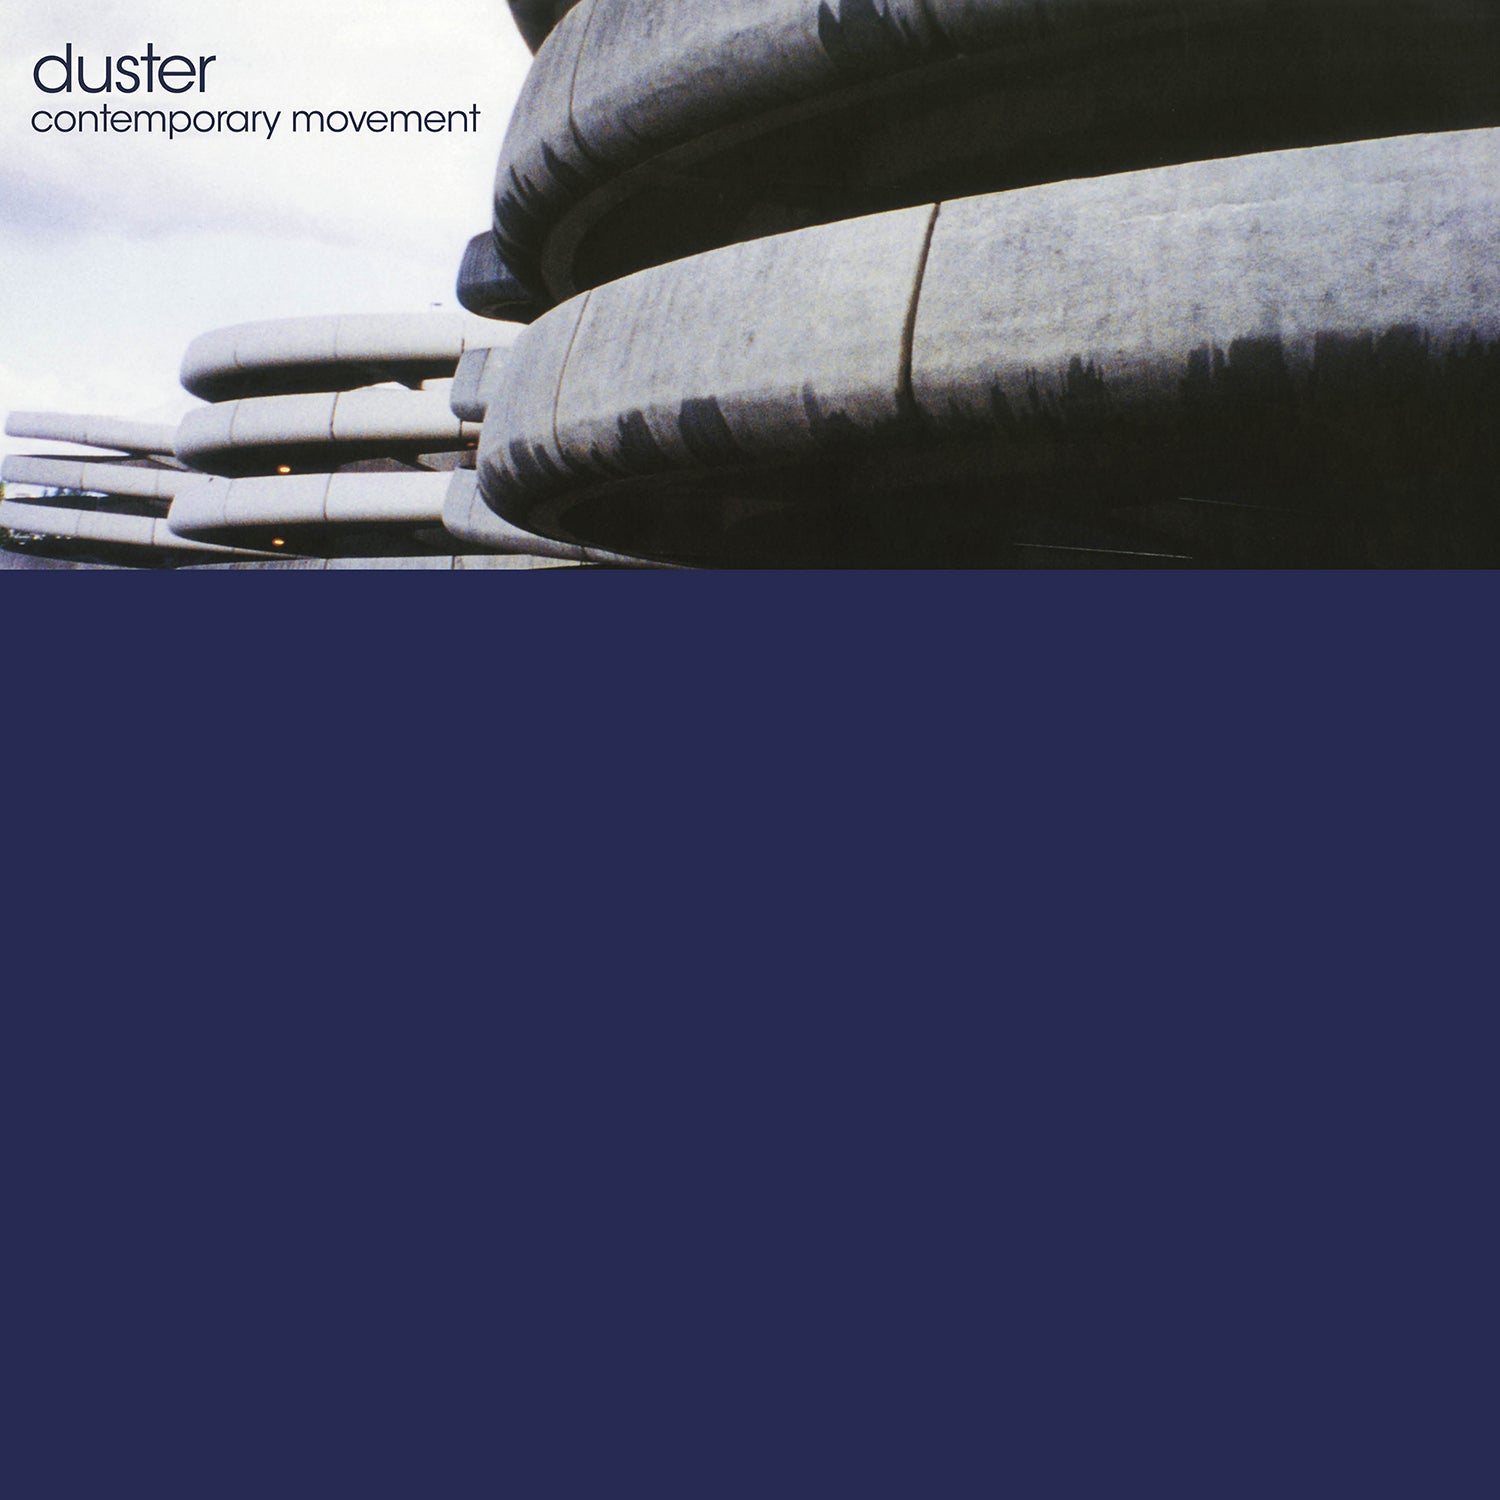 DUSTER 'CONTEMPORARY MOVEMENT'